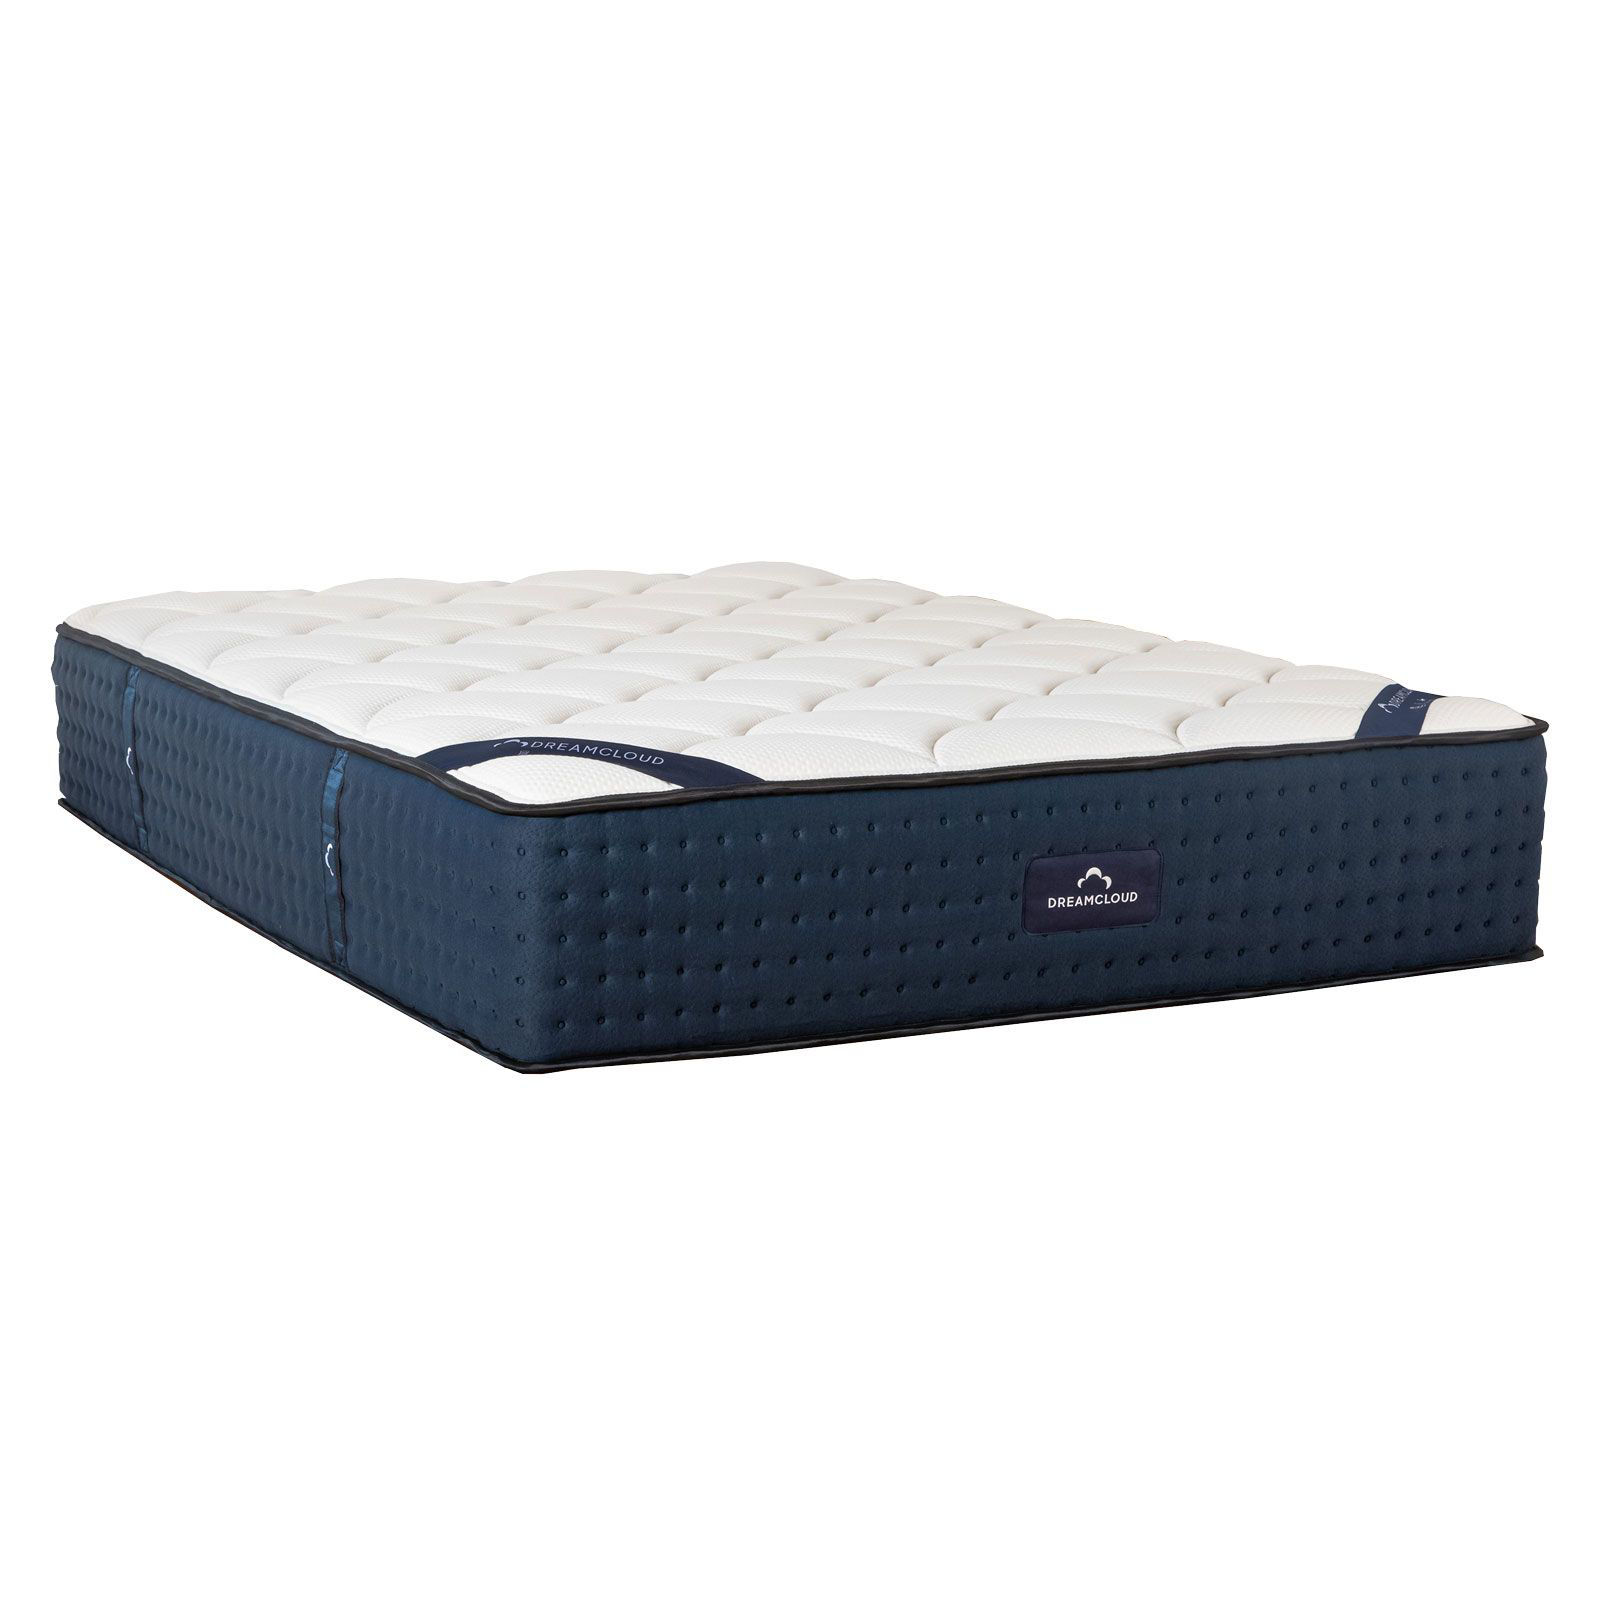 What To Look For When Shopping For A Tight Top Mattress